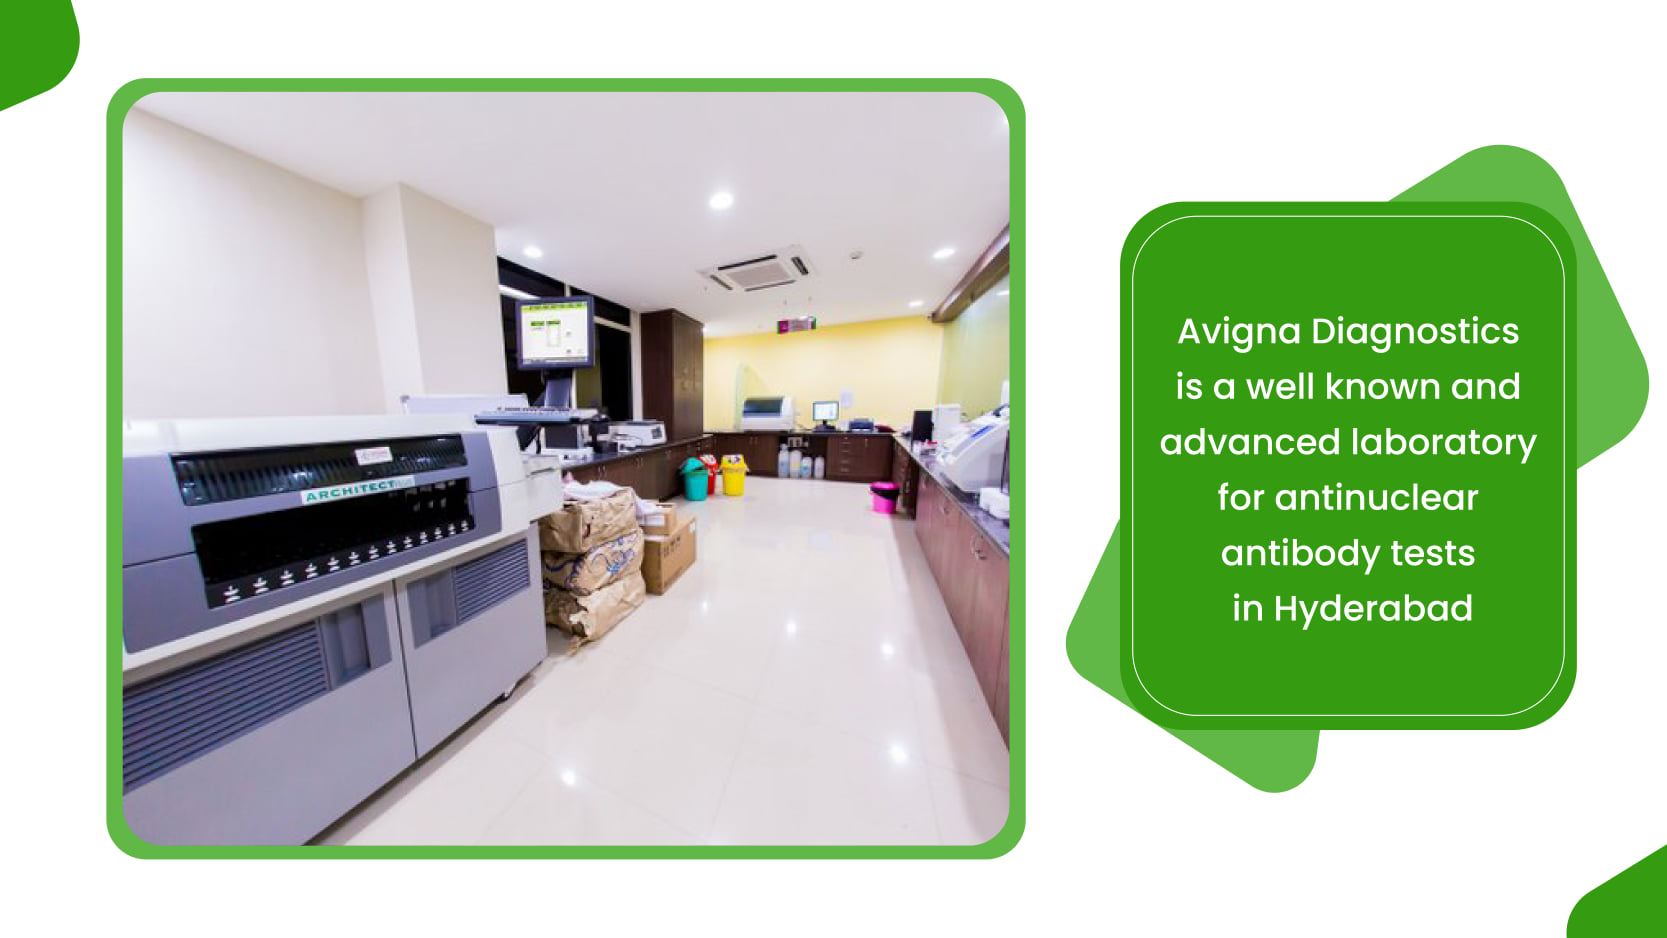 Avigna Diagnostics is a well known and advanced laboratory for antinuclear antibody tests in Hyderabad